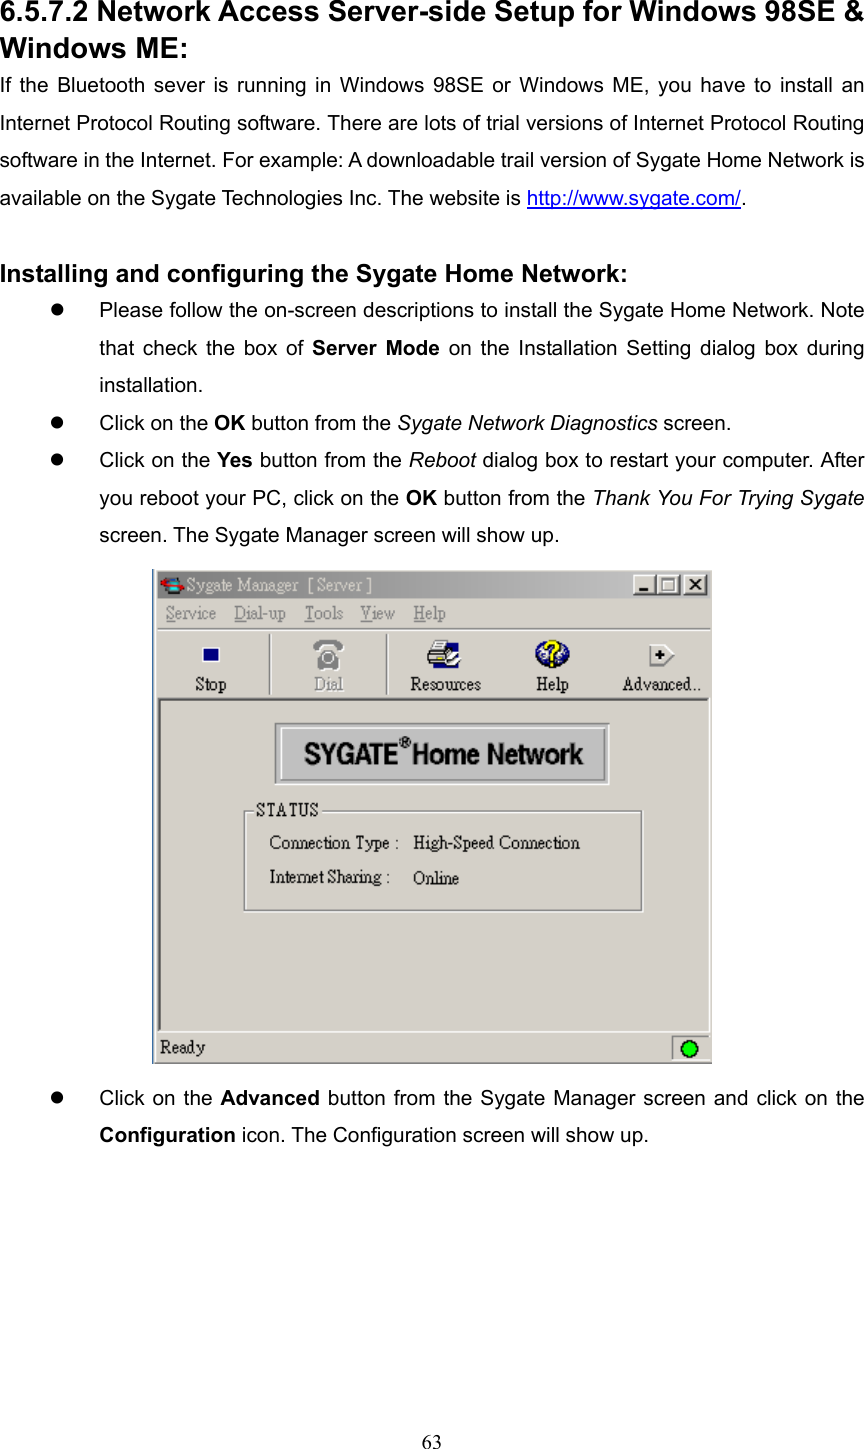  63  6.5.7.2 Network Access Server-side Setup for Windows 98SE &amp; Windows ME: If the Bluetooth sever is running in Windows 98SE or Windows ME, you have to install an Internet Protocol Routing software. There are lots of trial versions of Internet Protocol Routing software in the Internet. For example: A downloadable trail version of Sygate Home Network is available on the Sygate Technologies Inc. The website is http://www.sygate.com/.   Installing and configuring the Sygate Home Network:   Please follow the on-screen descriptions to install the Sygate Home Network. Note that check the box of Server Mode on the Installation Setting dialog box during installation.    Click on the OK button from the Sygate Network Diagnostics screen.    Click on the Yes button from the Reboot dialog box to restart your computer. After you reboot your PC, click on the OK button from the Thank You For Trying Sygate screen. The Sygate Manager screen will show up.    Click on the Advanced button from the Sygate Manager screen and click on the Configuration icon. The Configuration screen will show up. 